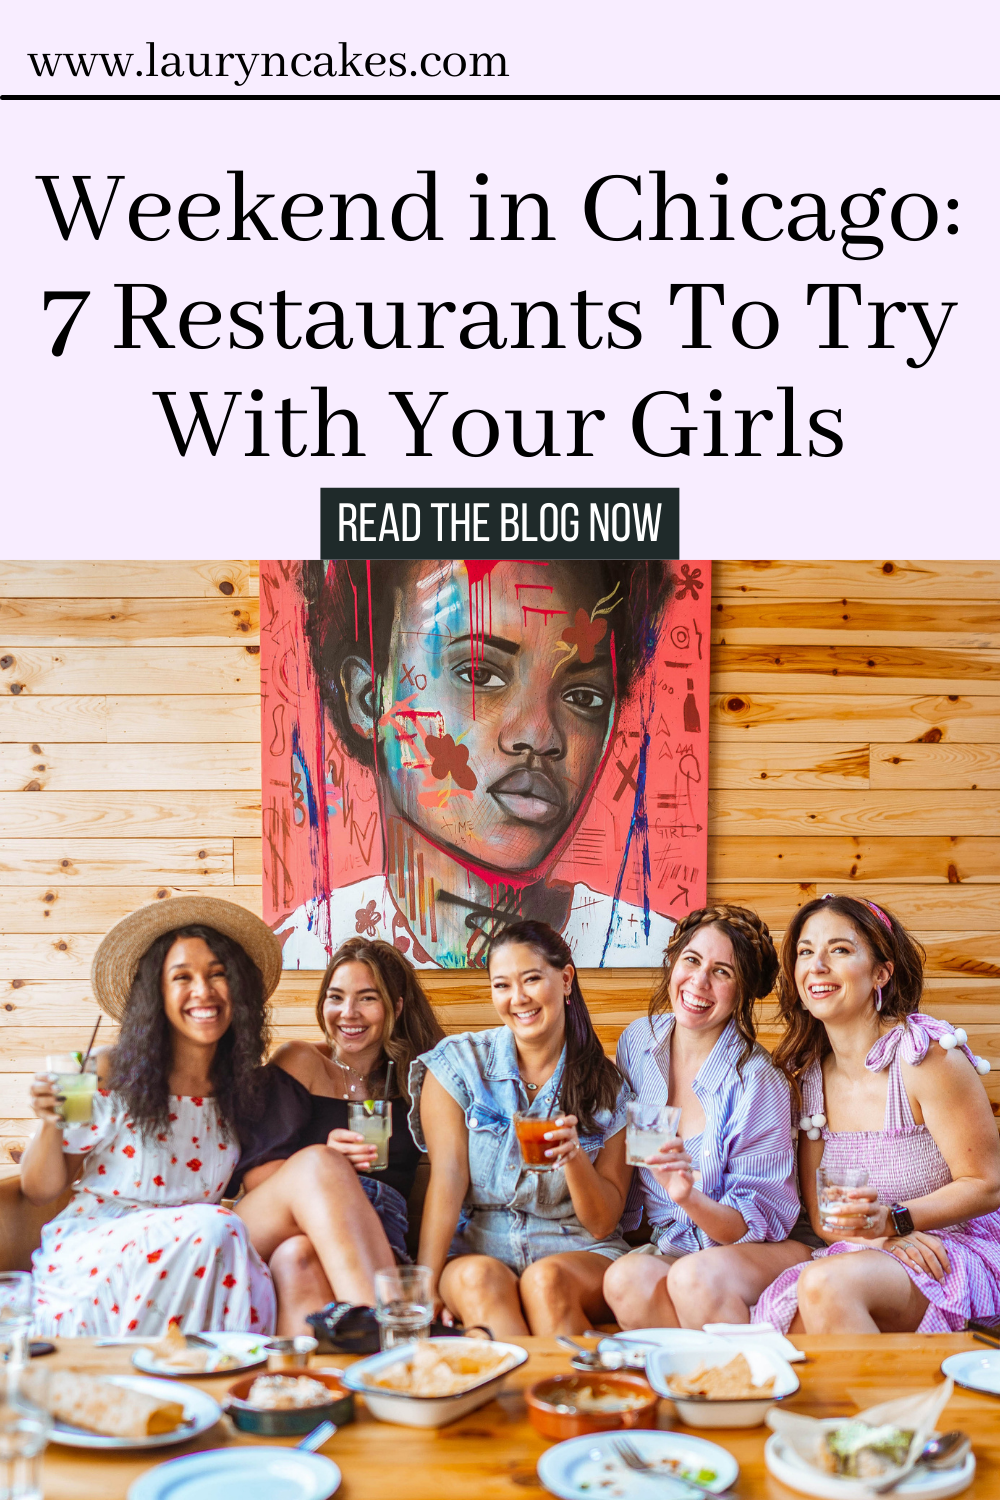 Photo of five women sitting on a Chicago restaurant couch during brunch holding drinks. Above the image it says "Weekend Trip in Chicago: 7 restaurants to try with Your Girls"